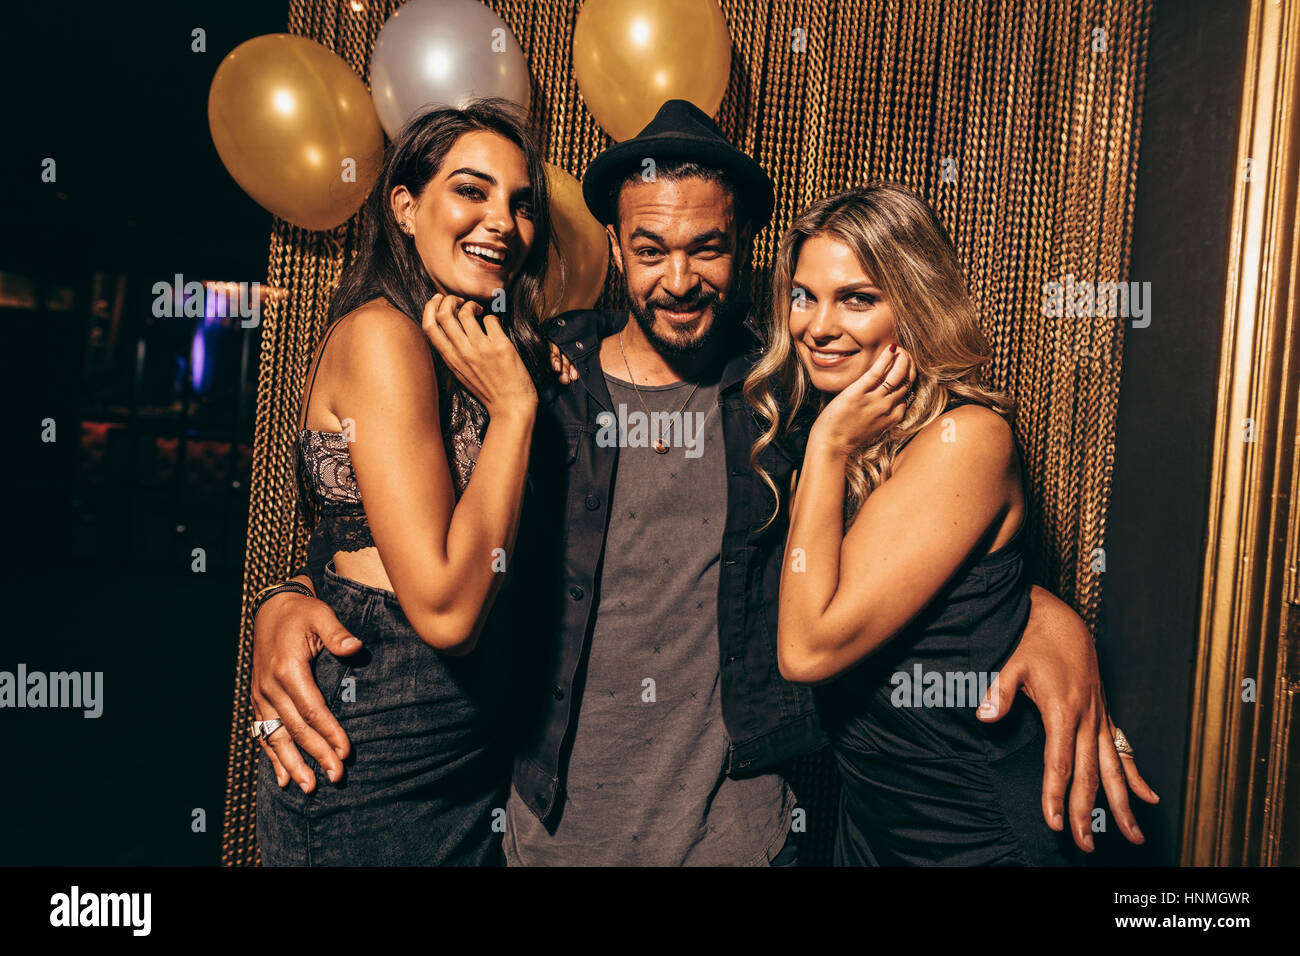 Portrait of handsome young man with female friends at nightclub. Young people partying at pub. Stock Photo